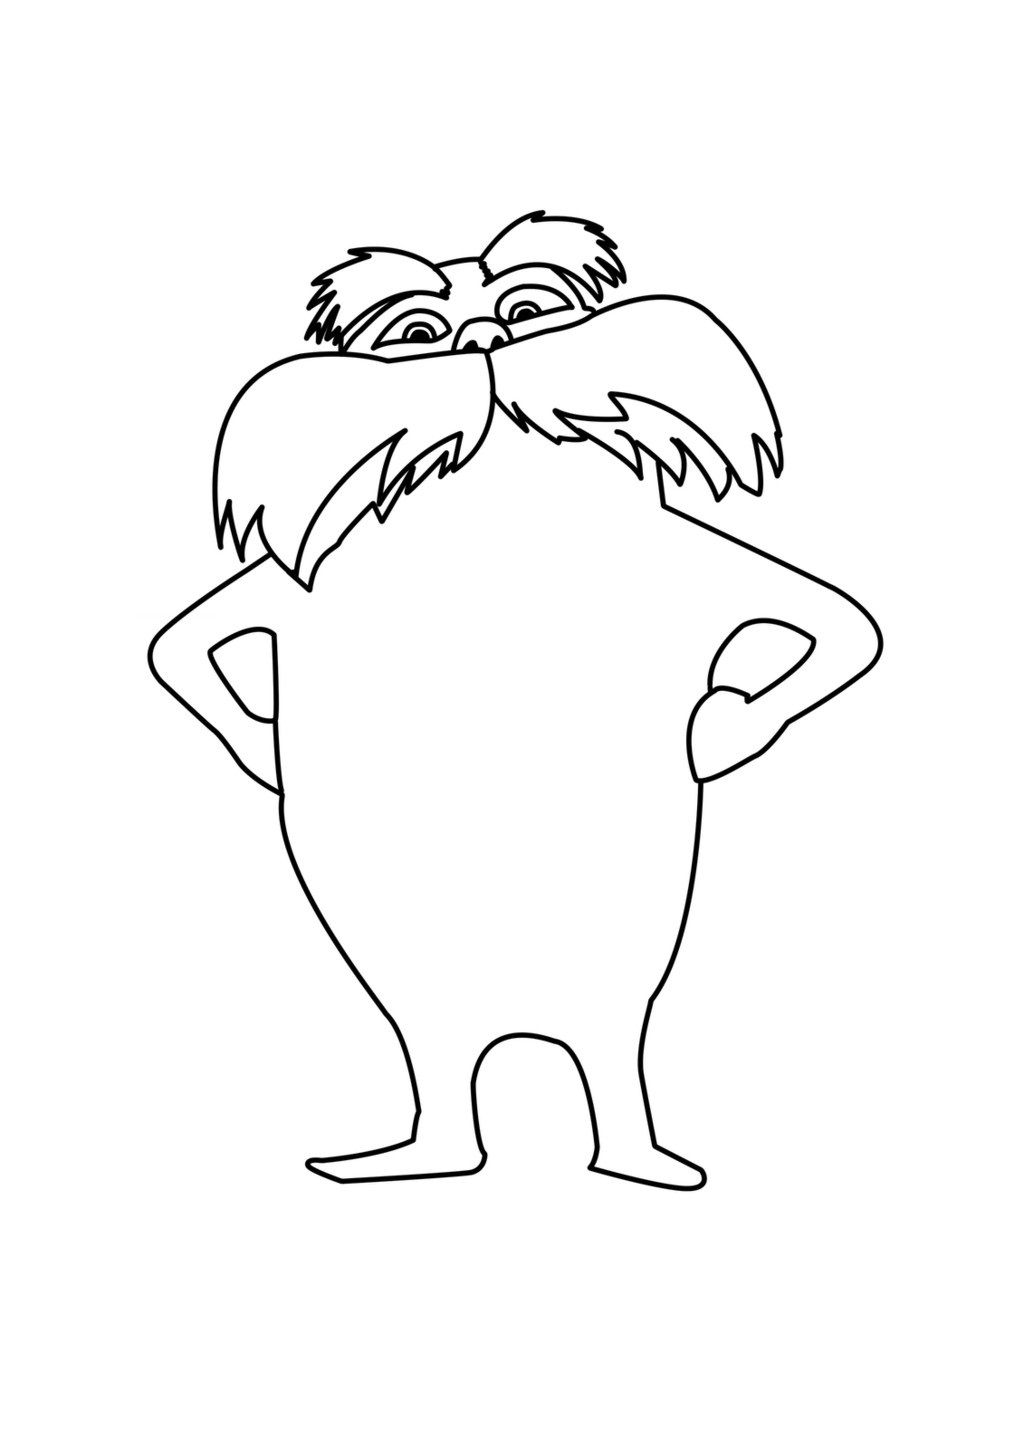 Dr. Seuss The Lorax Trees Coloring Pages Coloring Pages